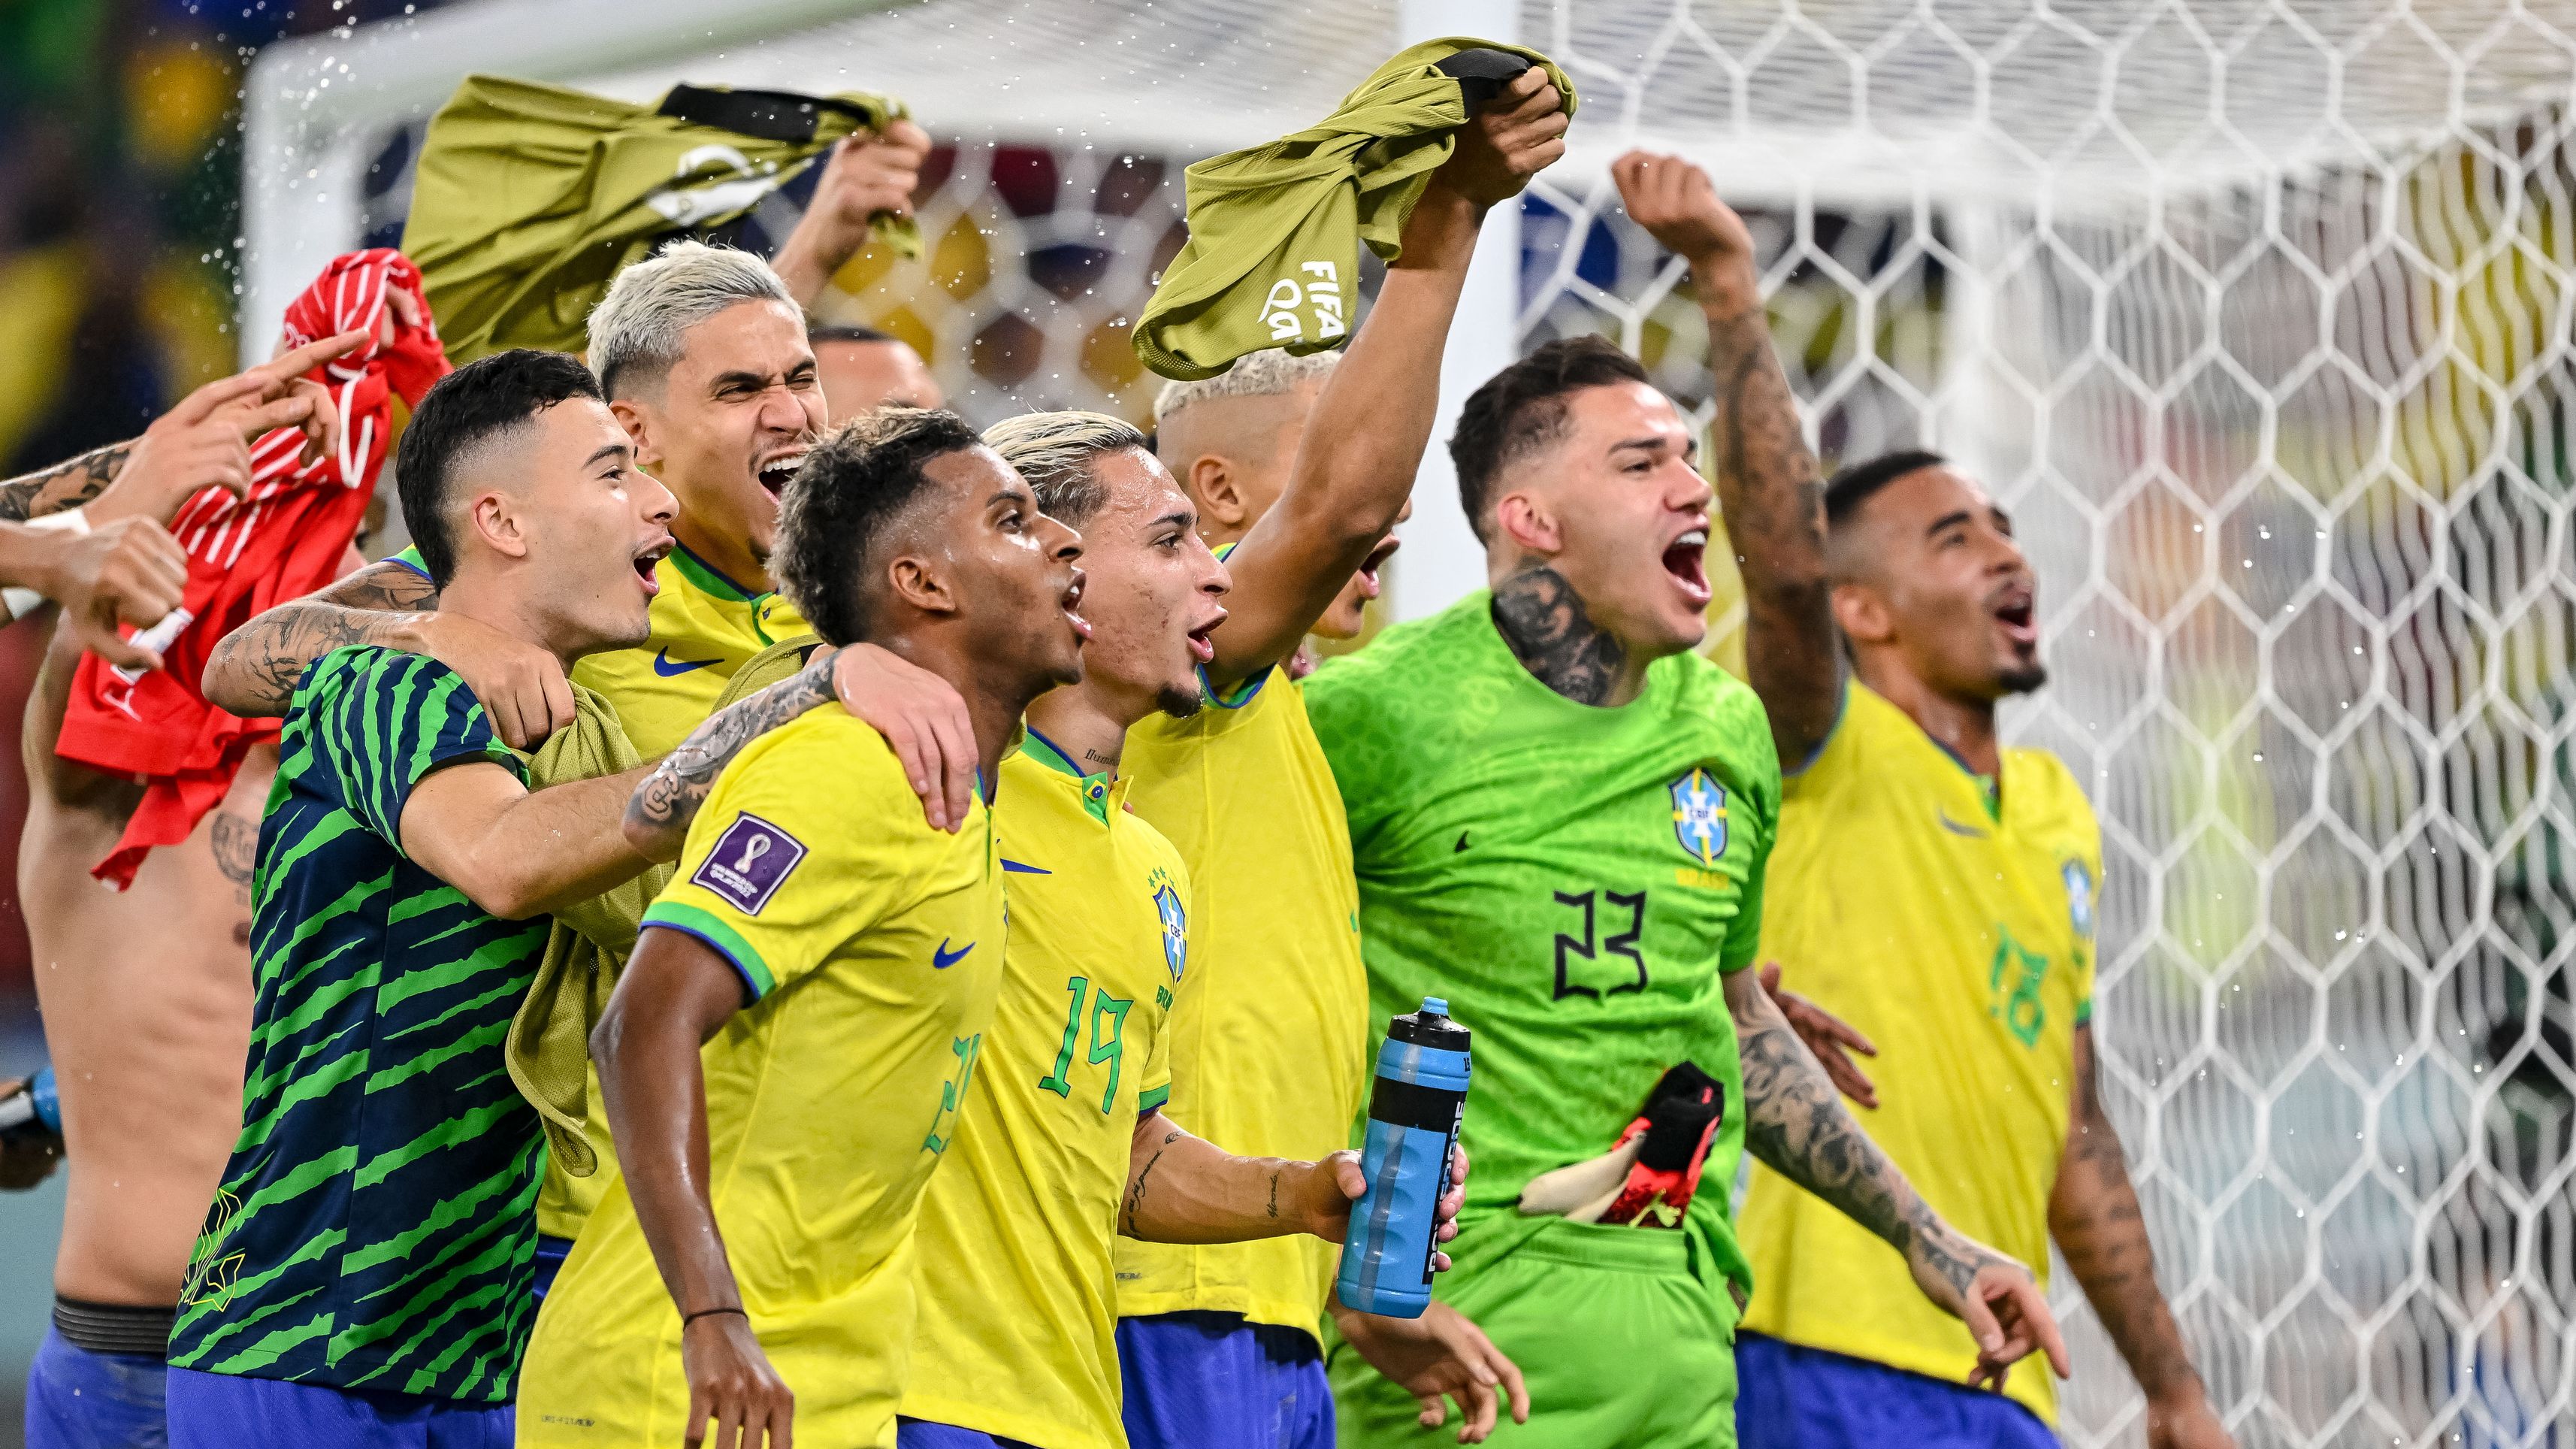 DOHA, QATAR - NOVEMBER 28: brazilian players celebrate after winning the FIFA World Cup Qatar 2022 Group G match between Brazil and Switzerland at Stadium 974 on November 28, 2022 in Doha, Qatar. (Photo by Harry Langer/DeFodi Images via Getty Images)